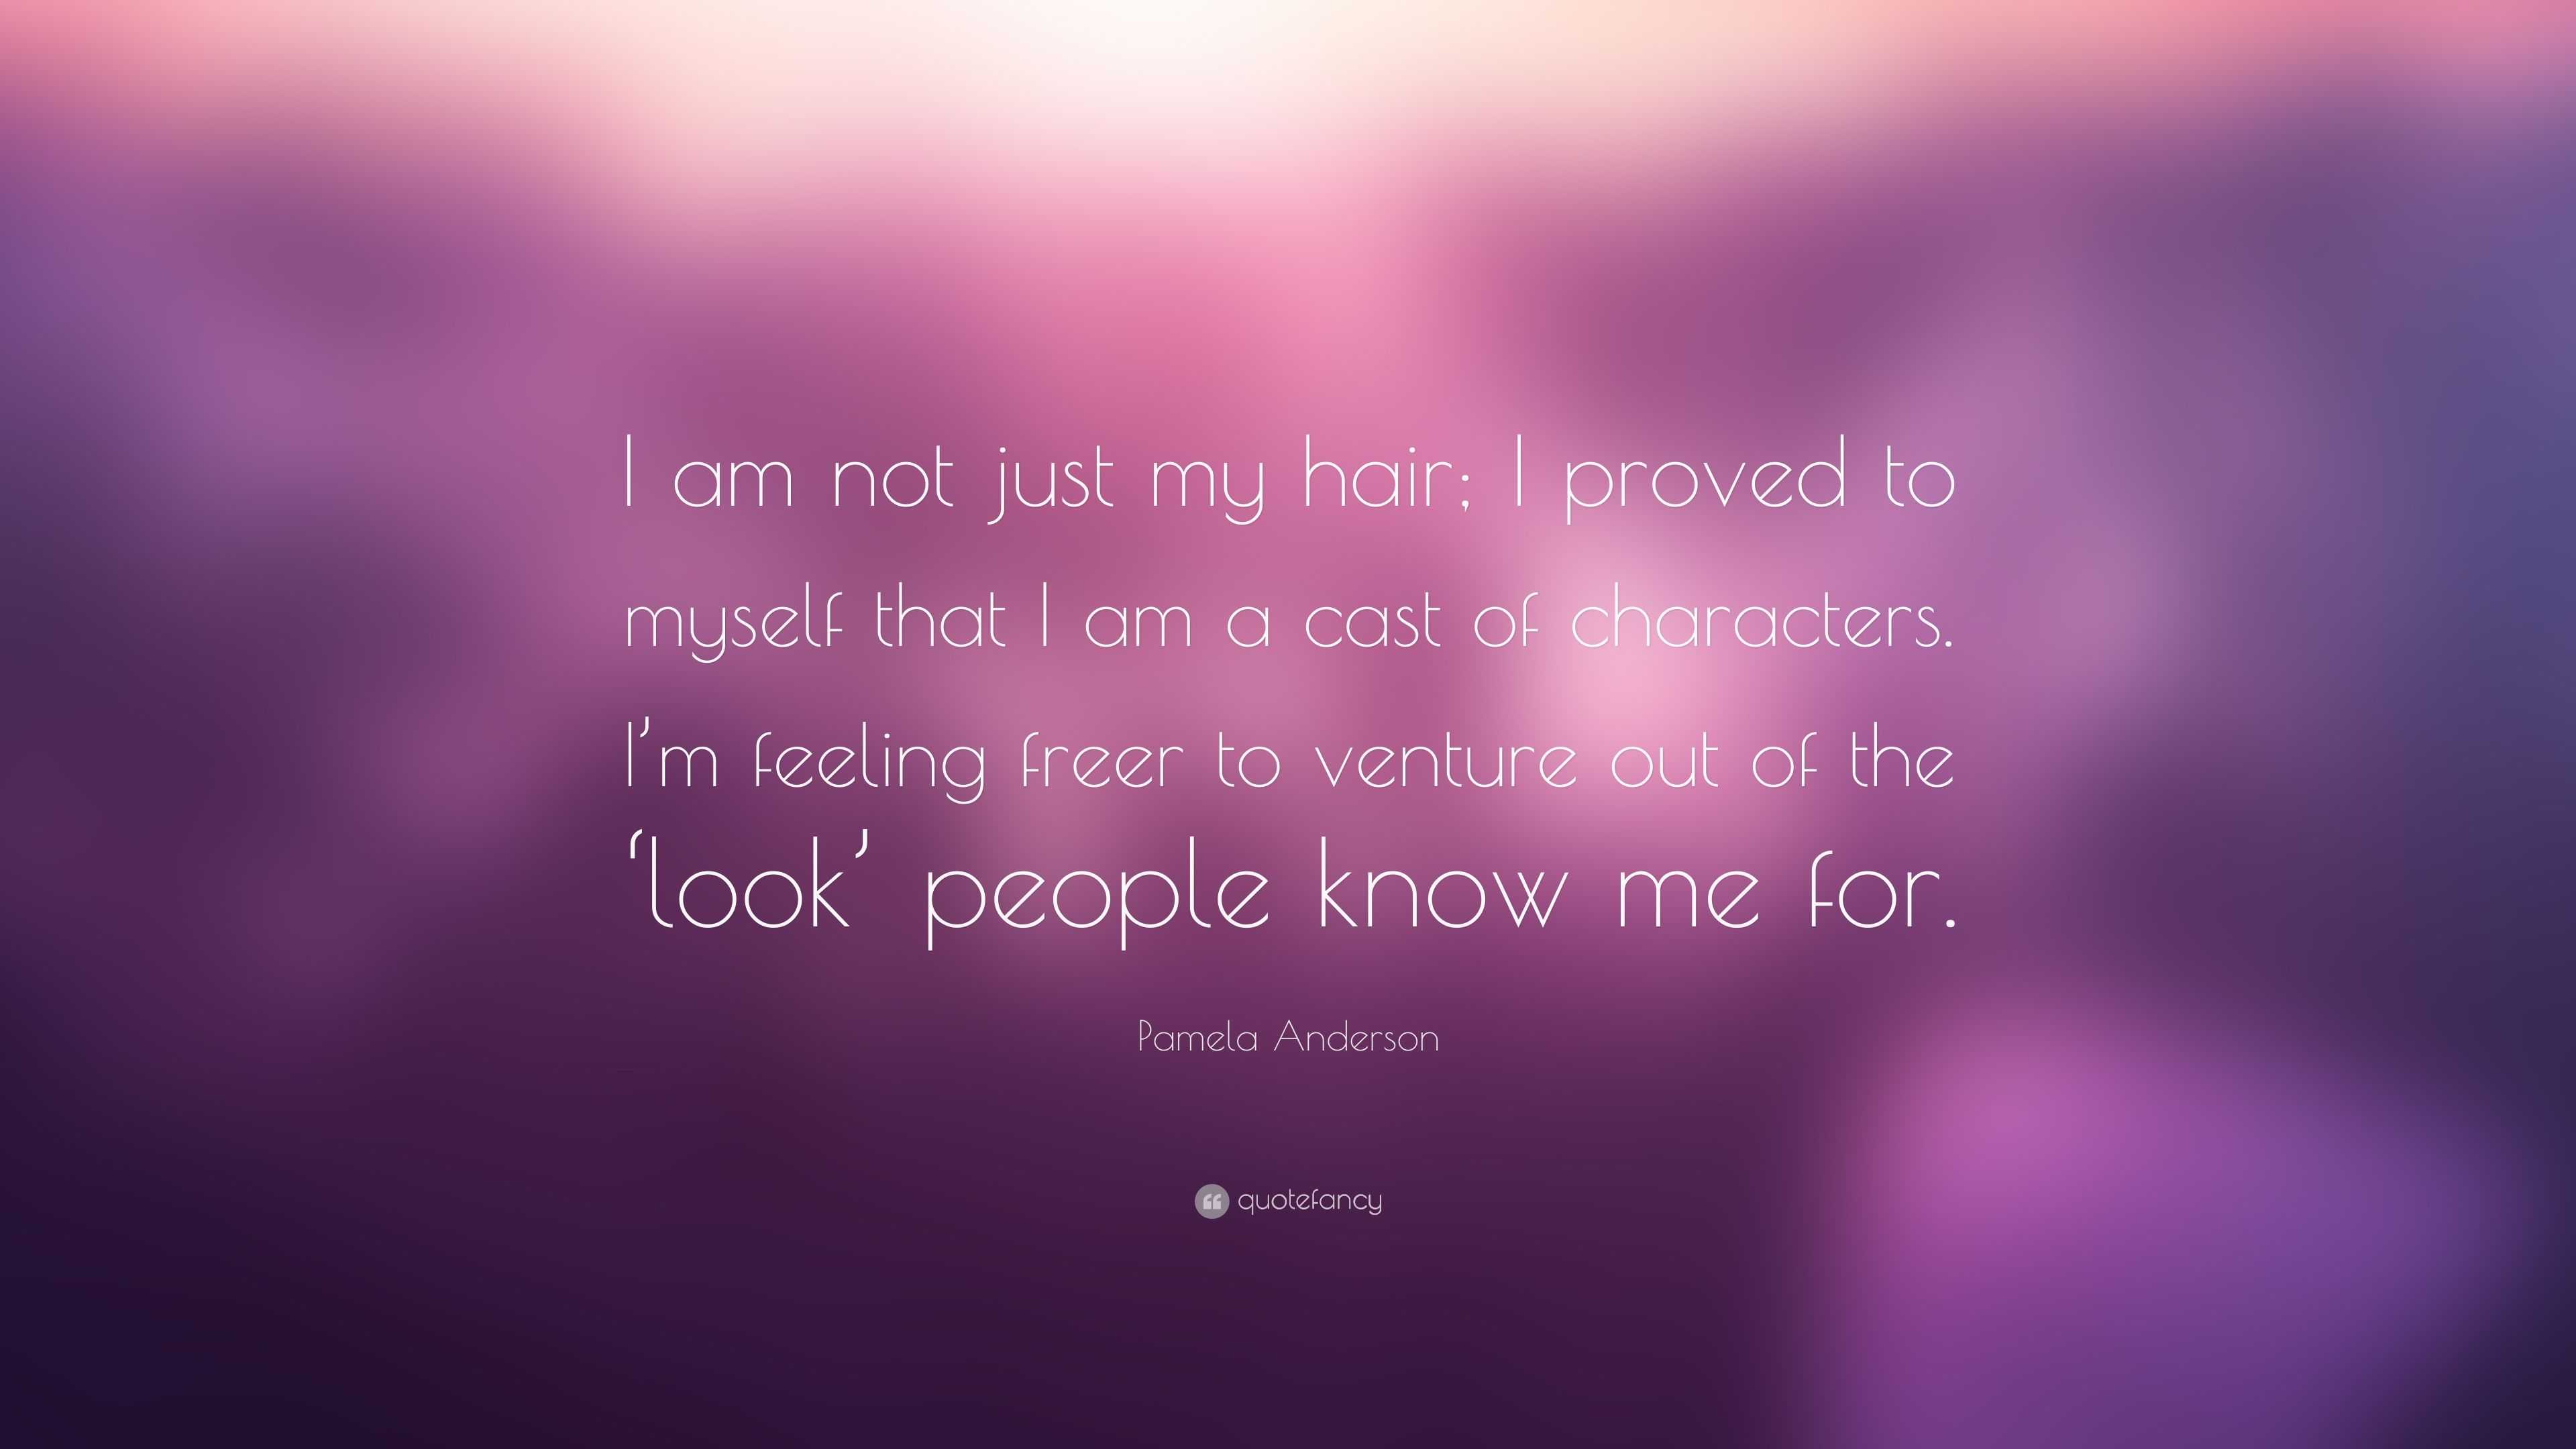 Pamela Anderson Quote: “I am not just my hair; I proved to myself that ...